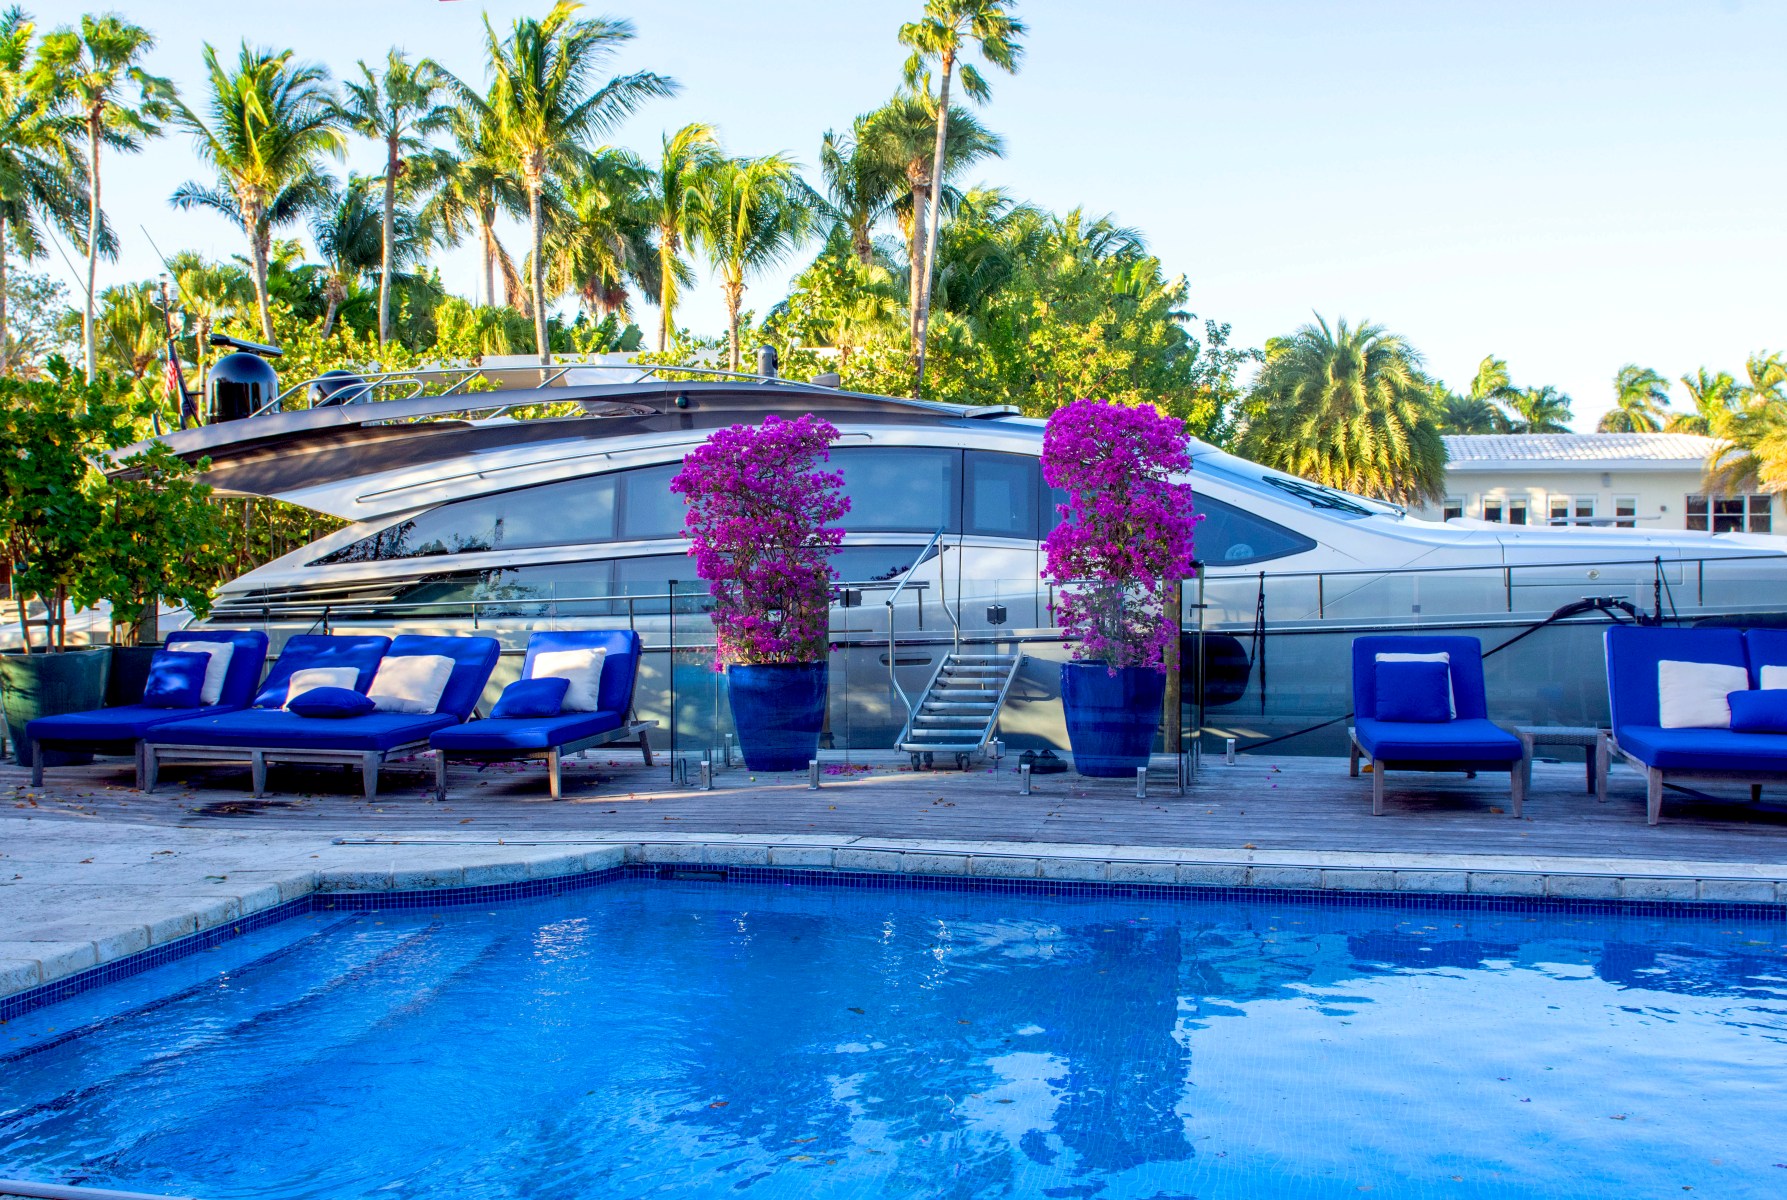 Behind the pool rests “Groot,” an 82-foot Pershing yacht, on which Grutman takes his guests. “it’s more of a hospitality move than anything,” he says.